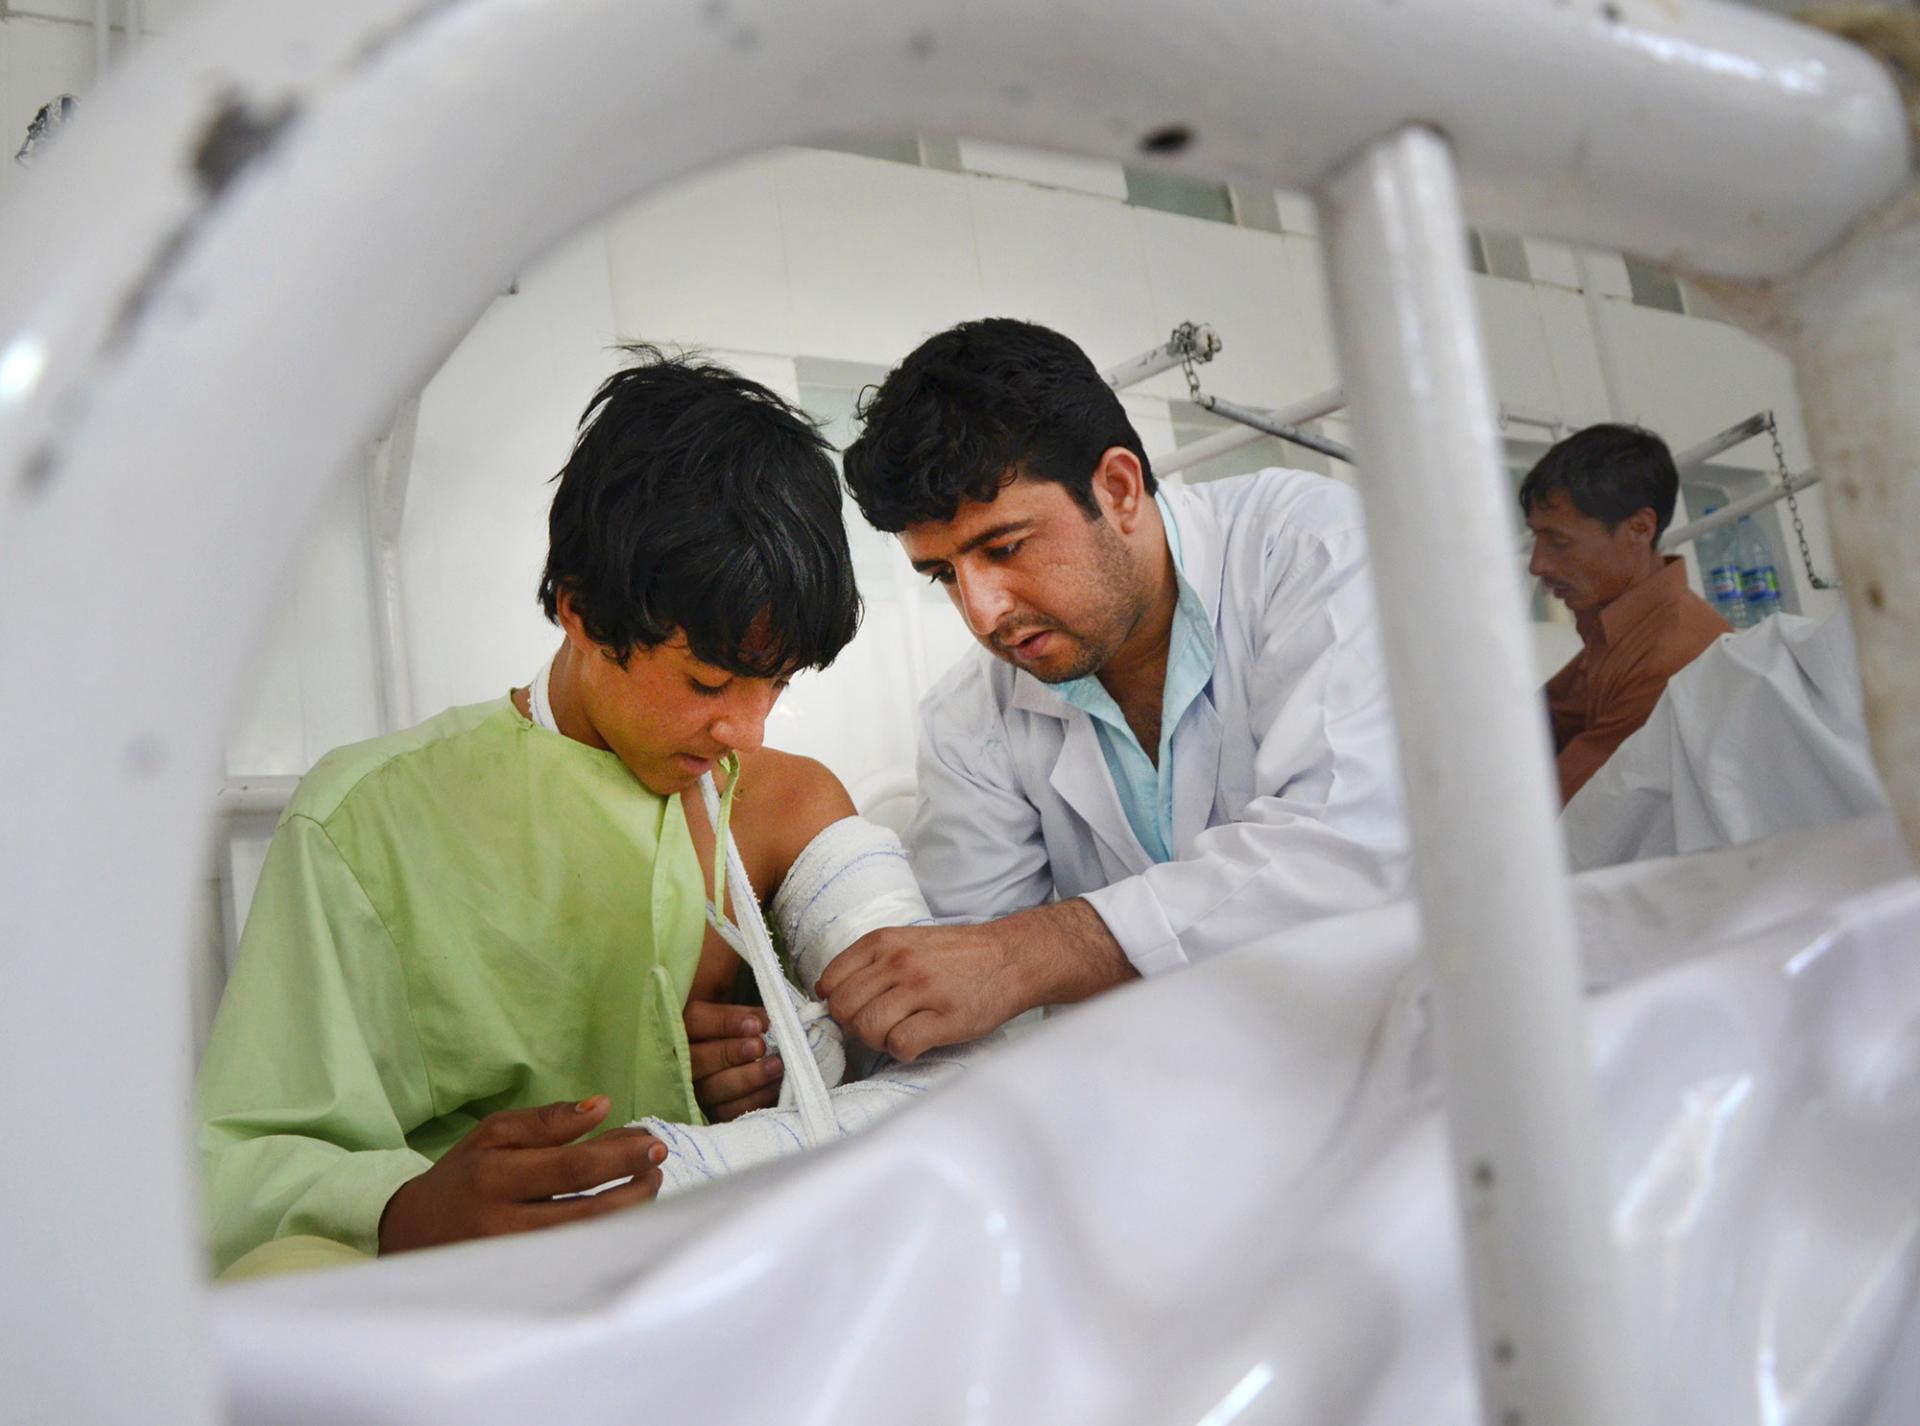 MSF physiotherapist Baryali Baloch fixes bandages on the arm of a patient 